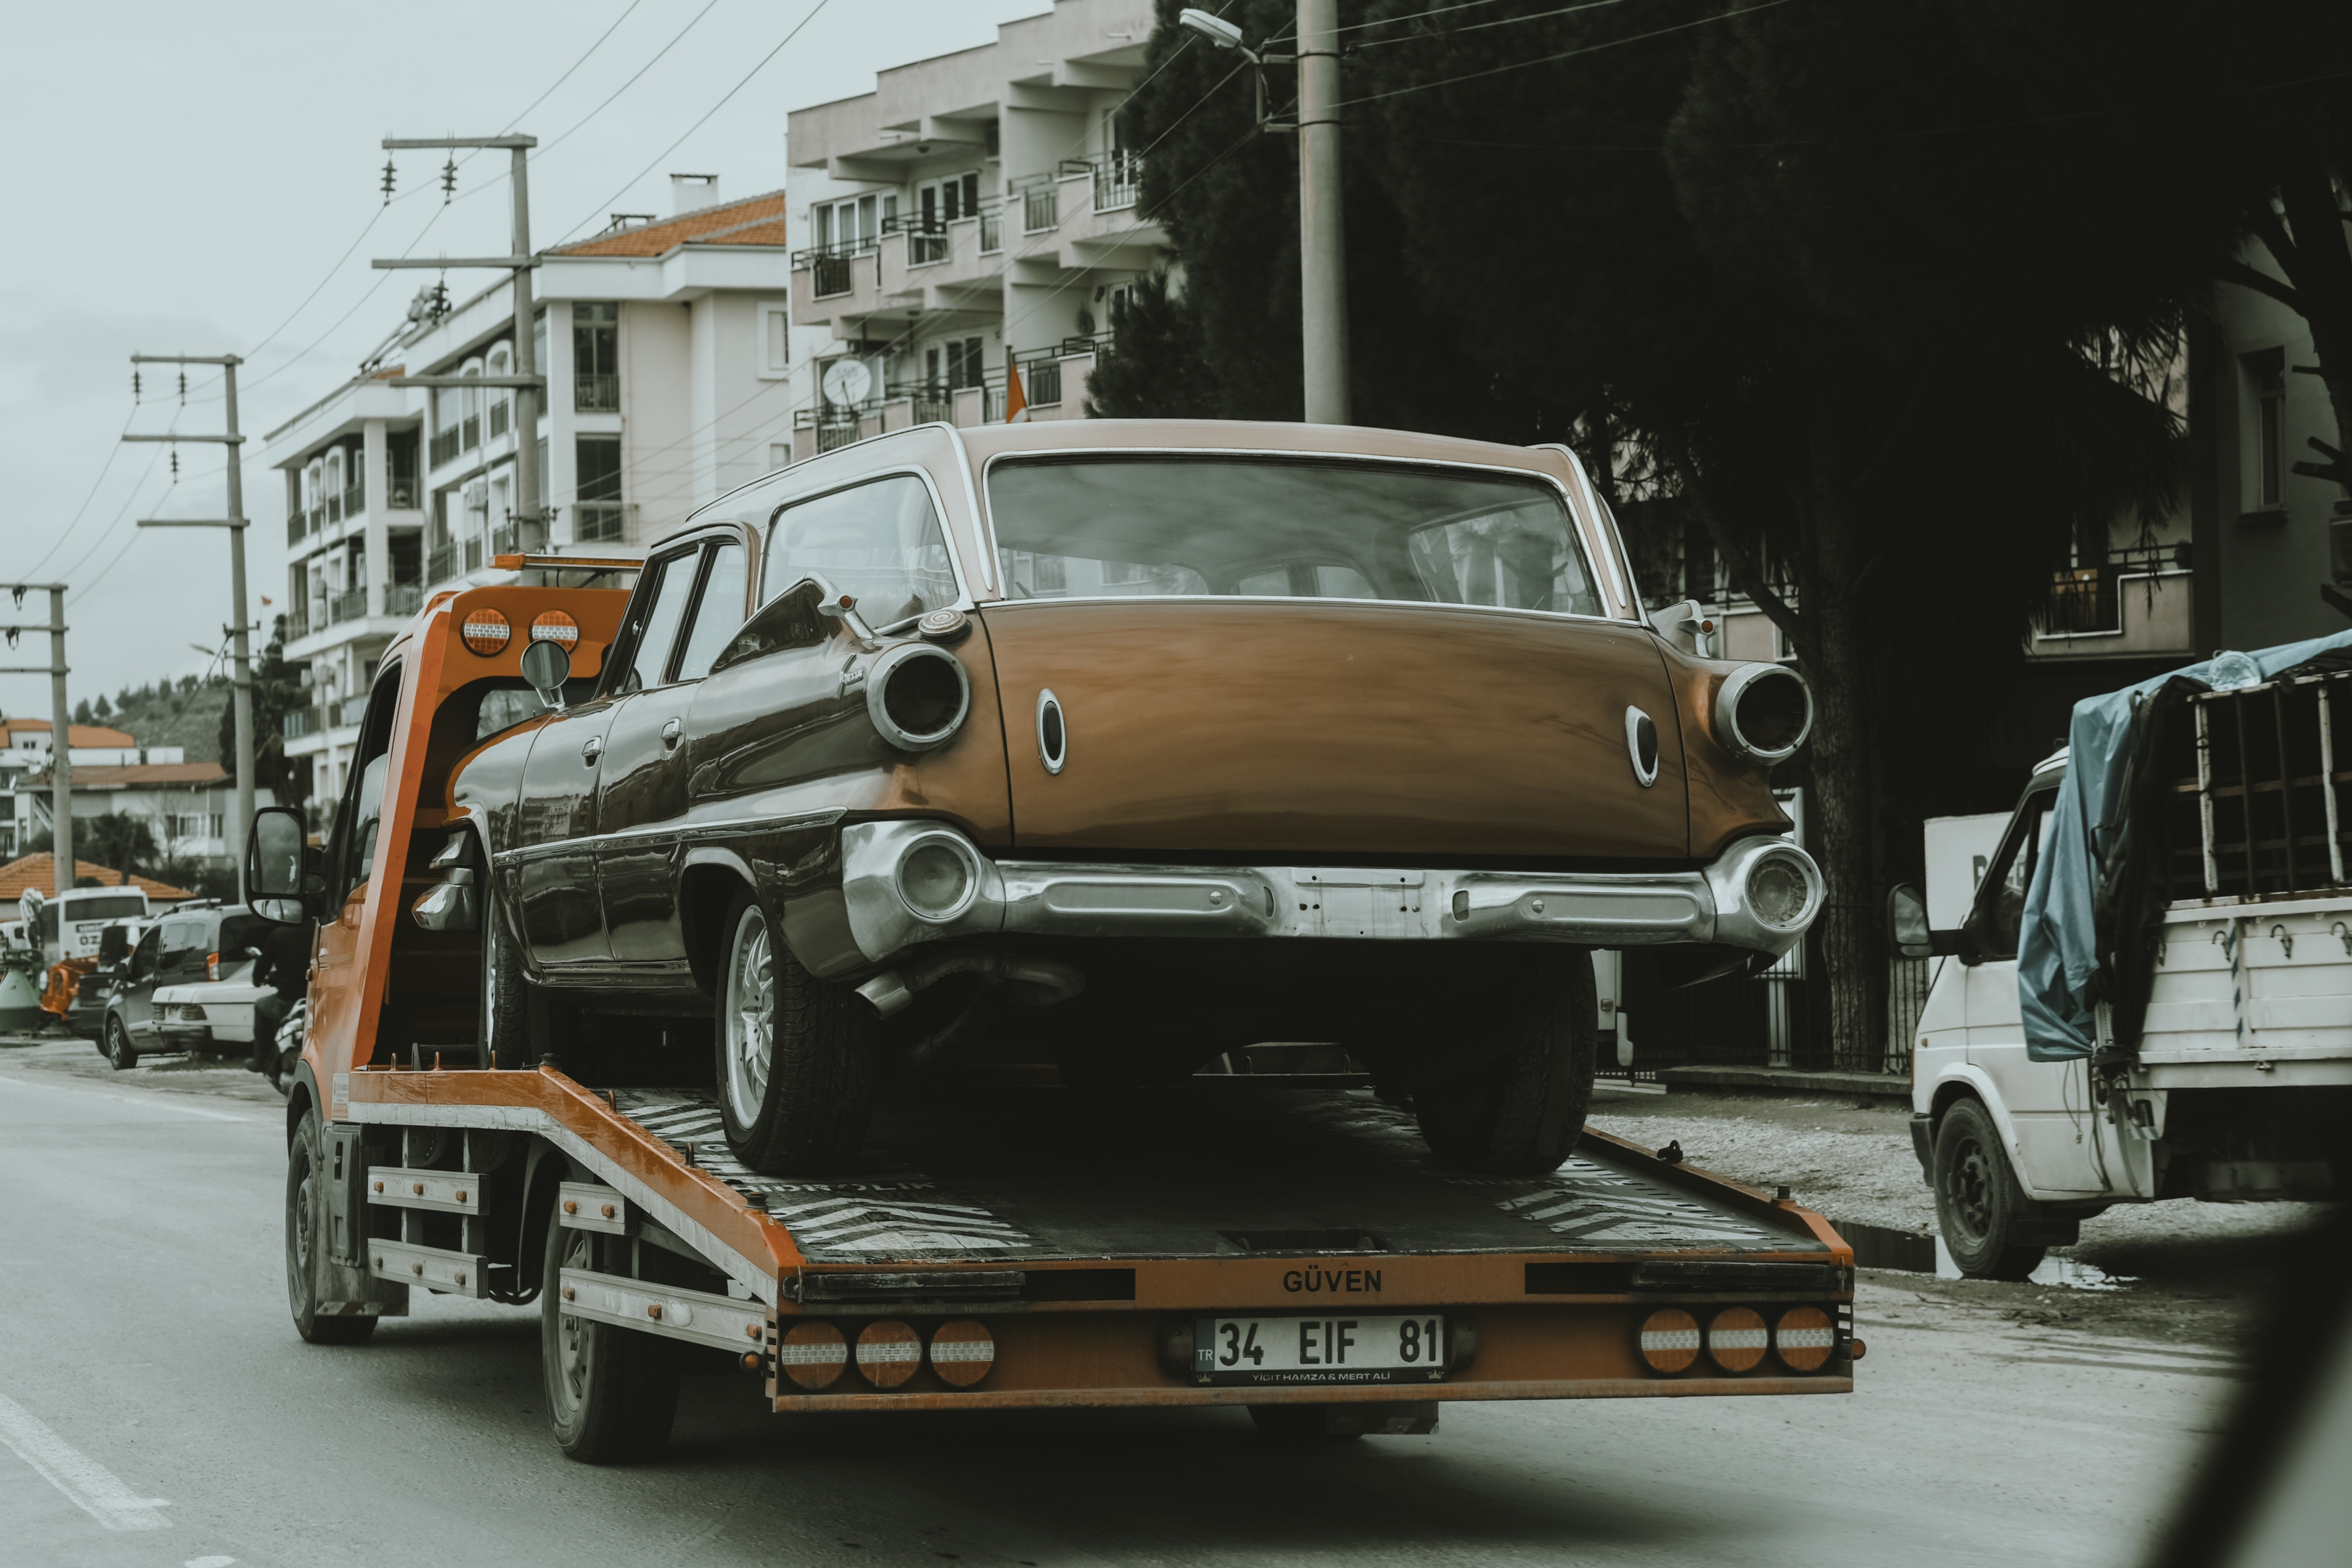 Many sites that sell cars offer free towing services